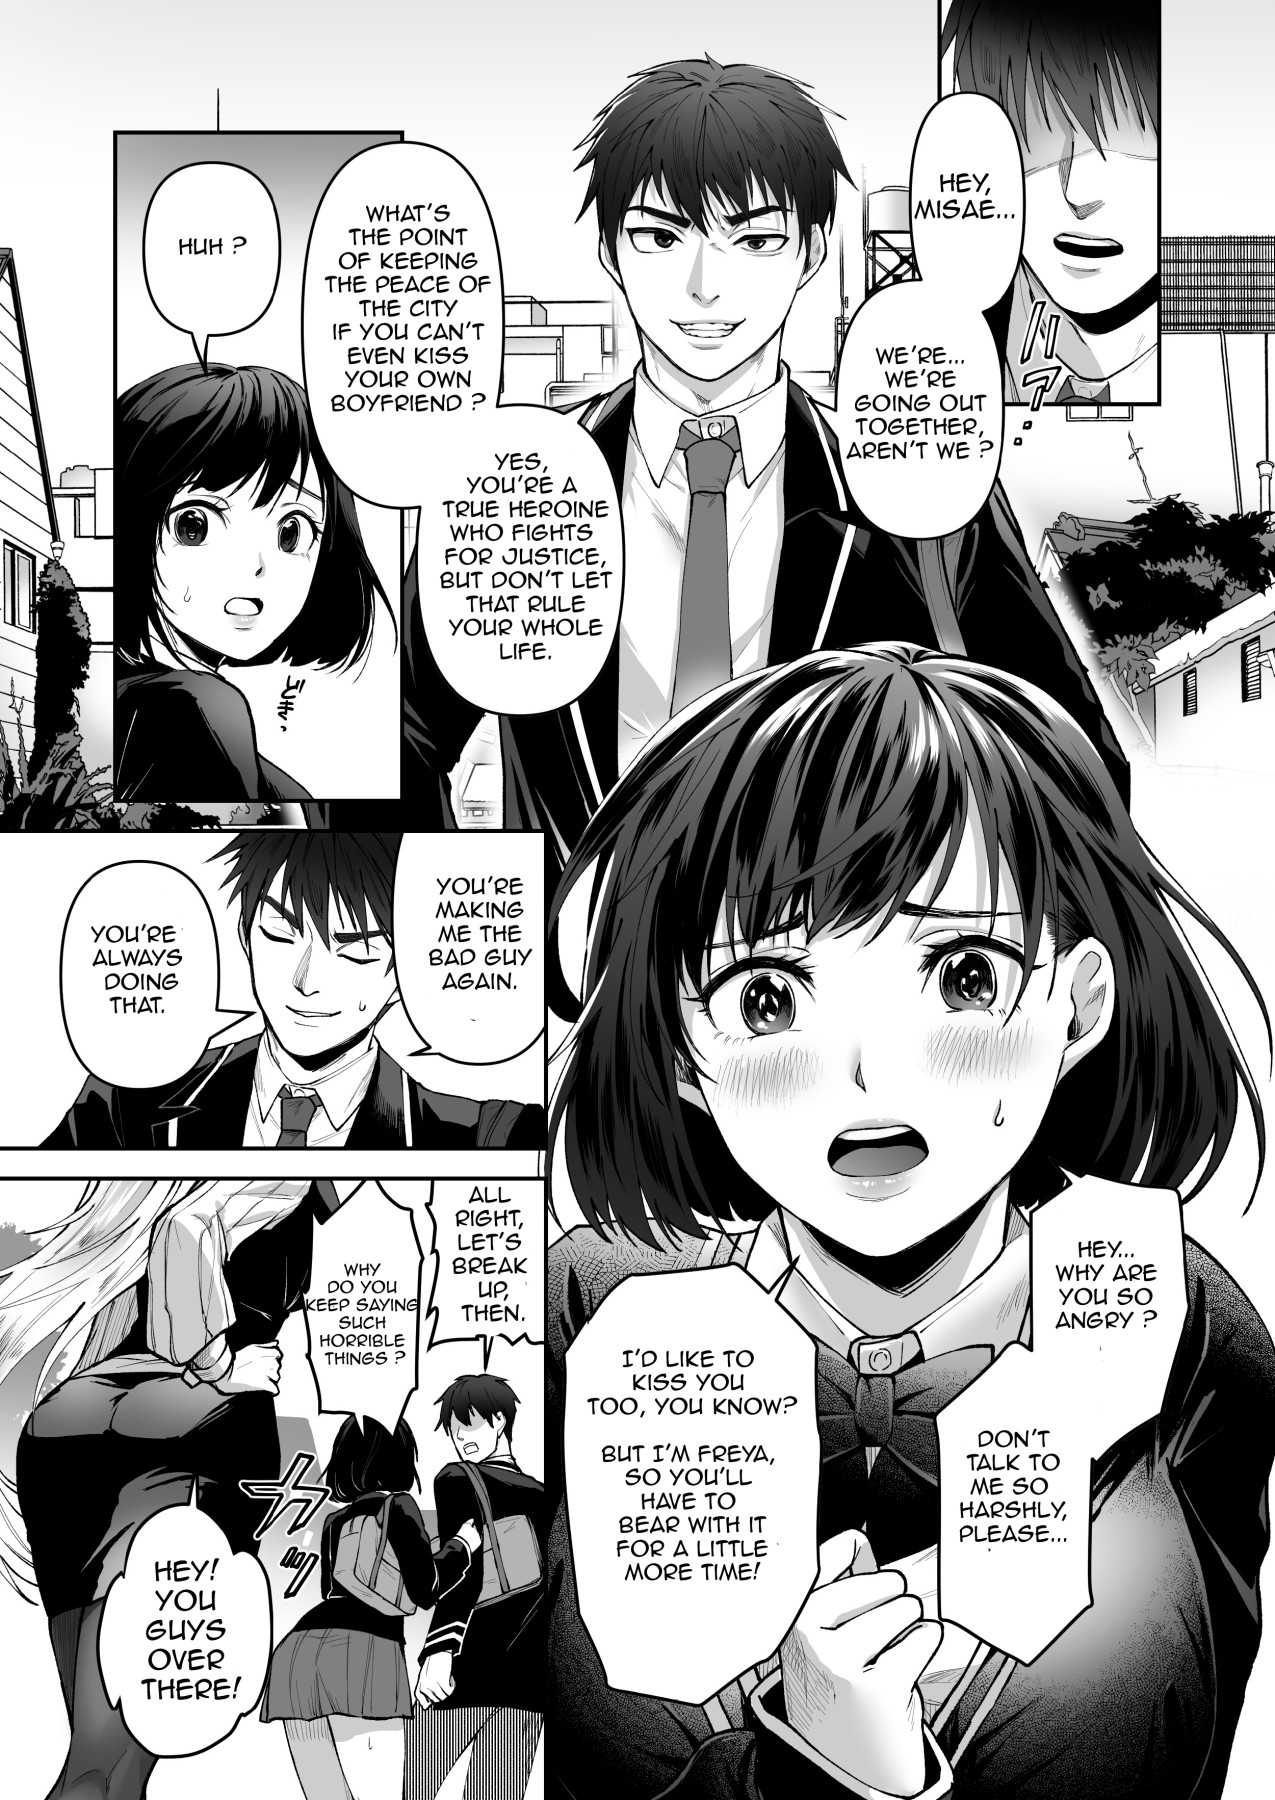 Hentai Manga Comic-How To Make a Champion of Justice Fall-Read-3